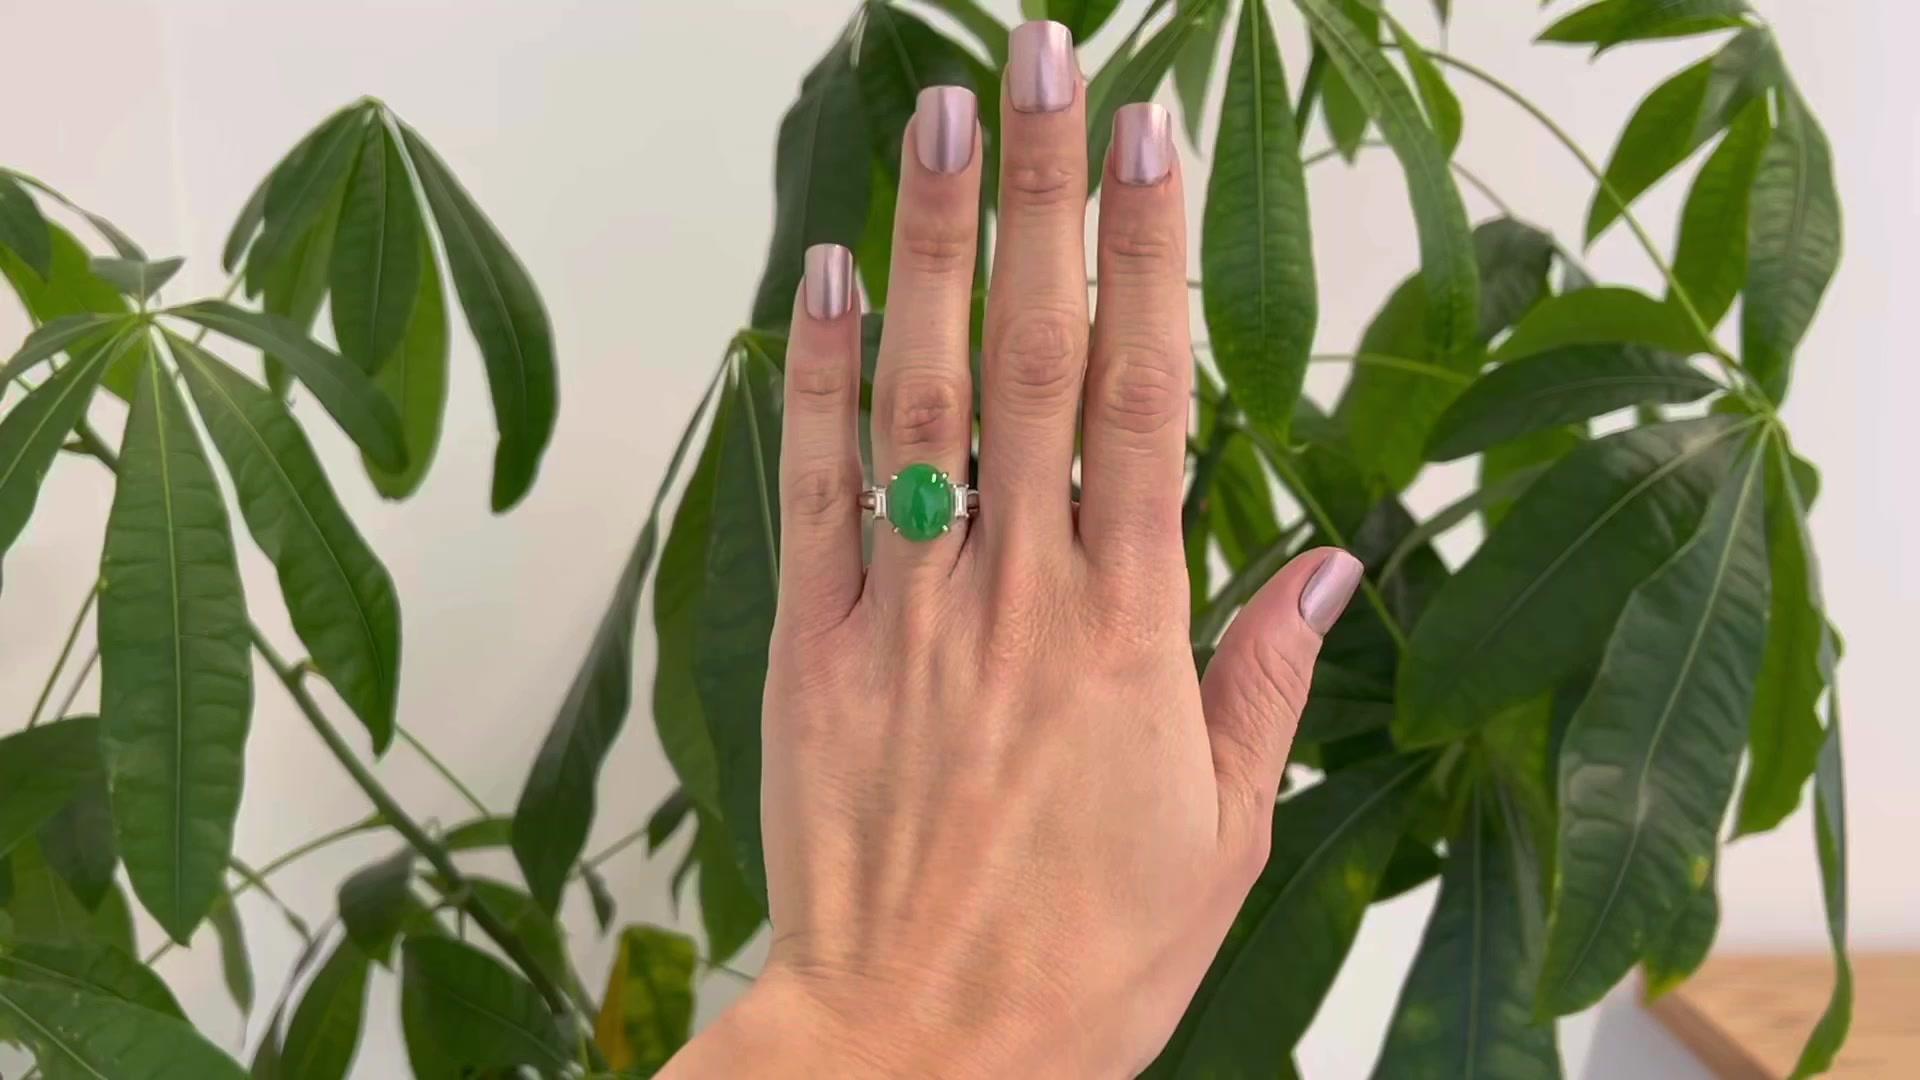 One GIA 7.56 Carat Untreated Jade Diamond Platinum Ring. Featuring one GIA natural jade cabochon weighing 7.56 carats, accompanied with certificate #5221670601 stating the stone has not been treated. Accented by two baguette cut diamonds with a